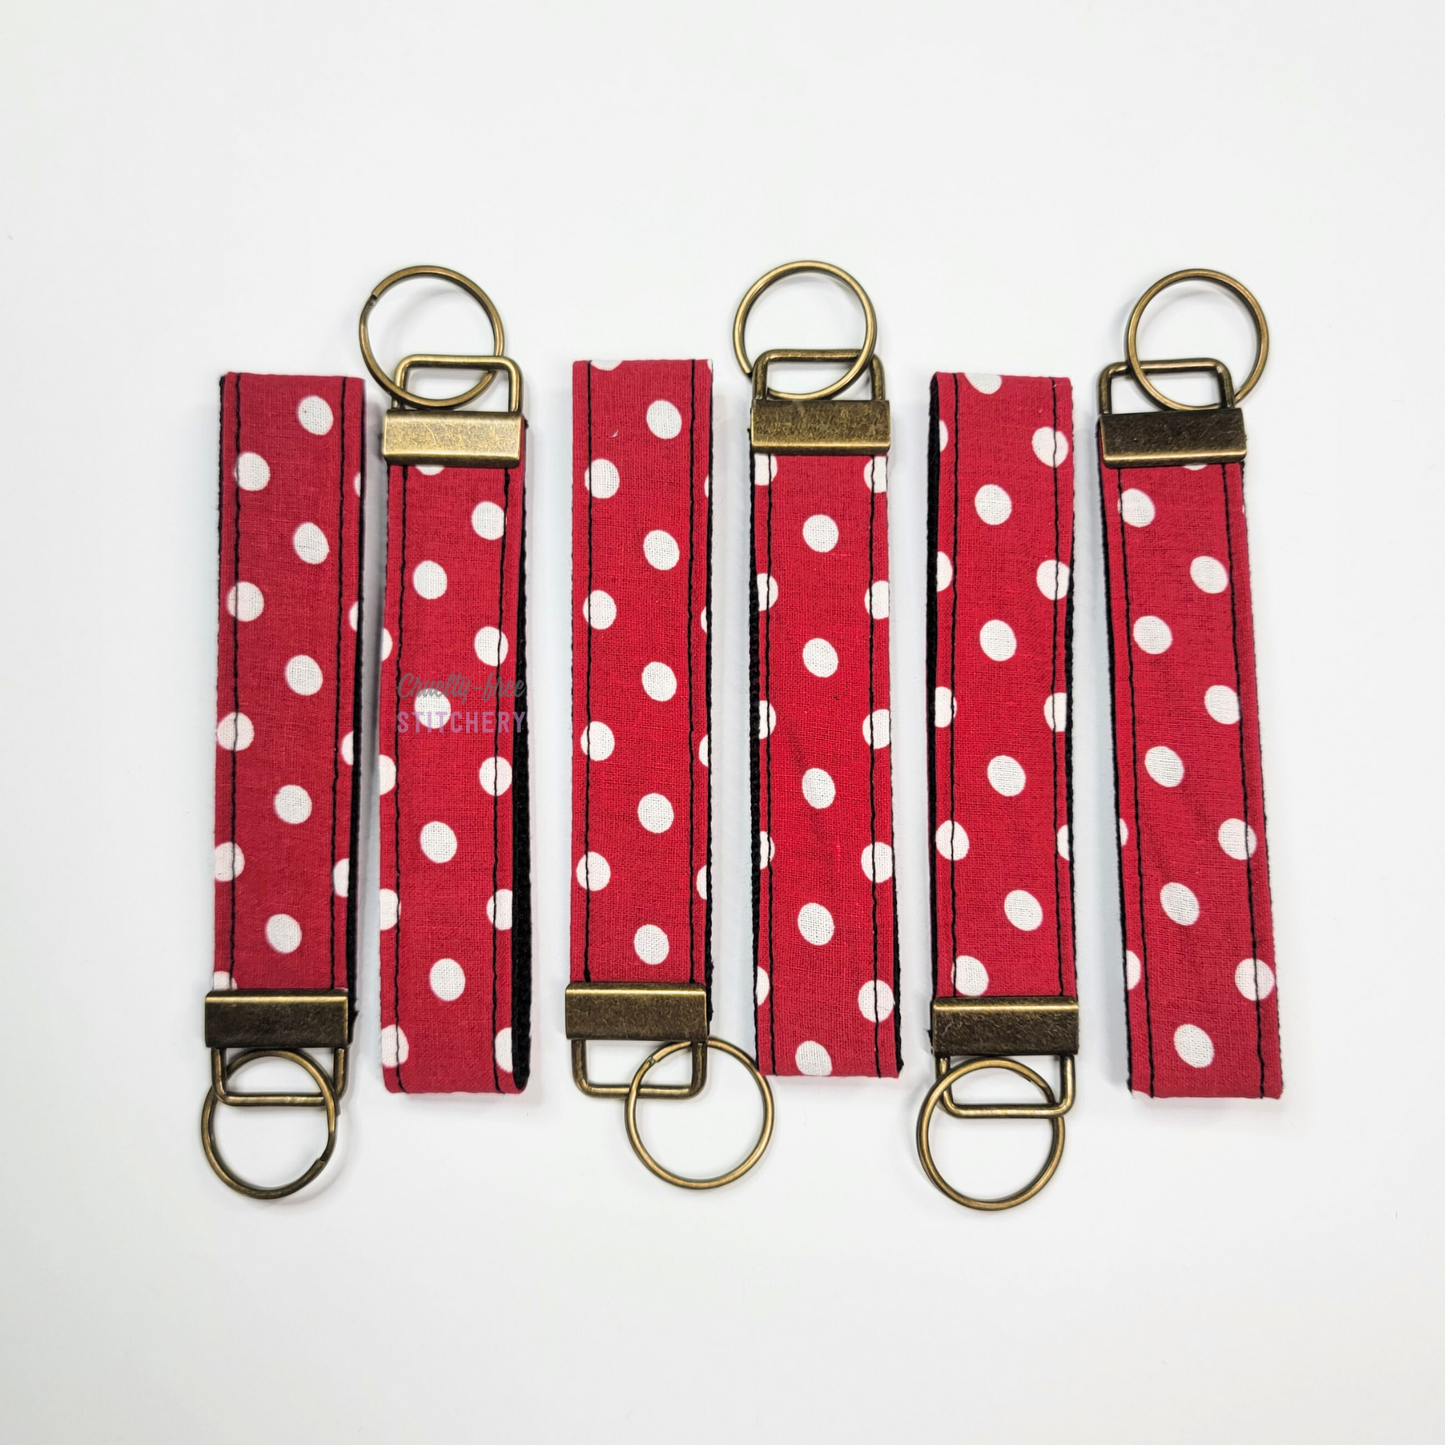 Red and white polka dots key fob wristlets arranged in neat rows with alternating directions.